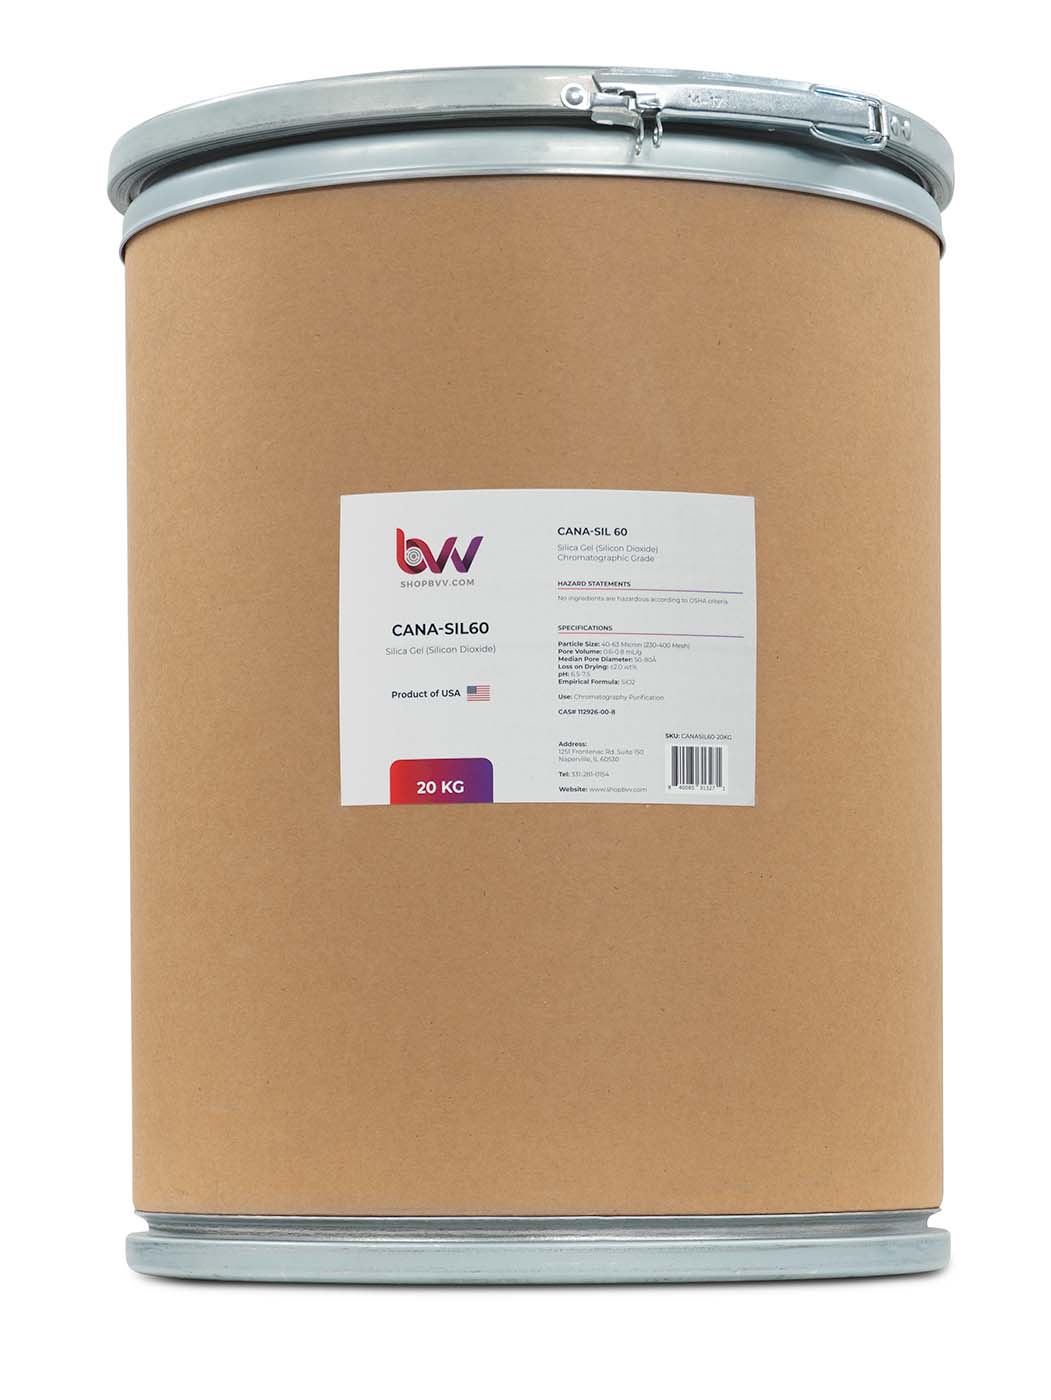 CANA-SIL60™ Silica Gel 60A Chromatographic Grade 40-63 micron (230-400 Mesh) New Products BVV 20 Kg 